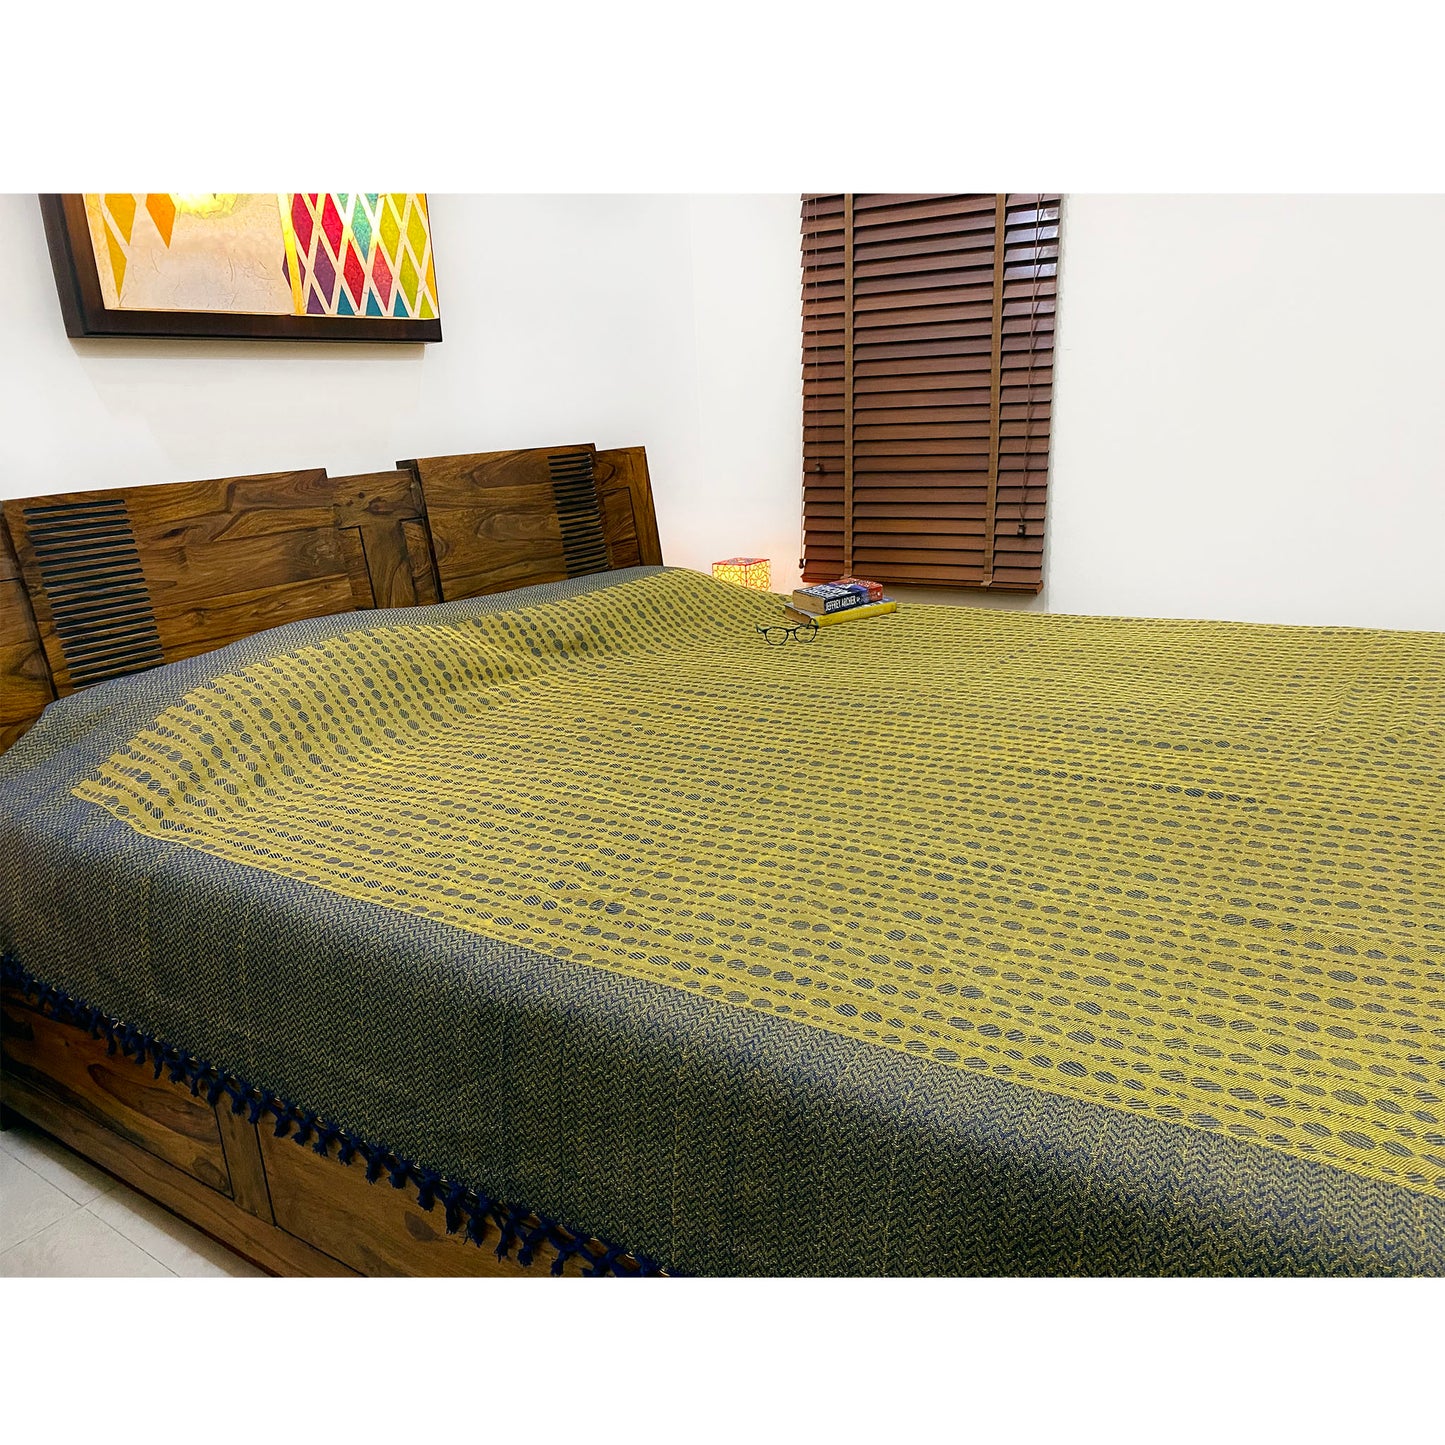 handloom-queen-size-bed-cover-at-best-price